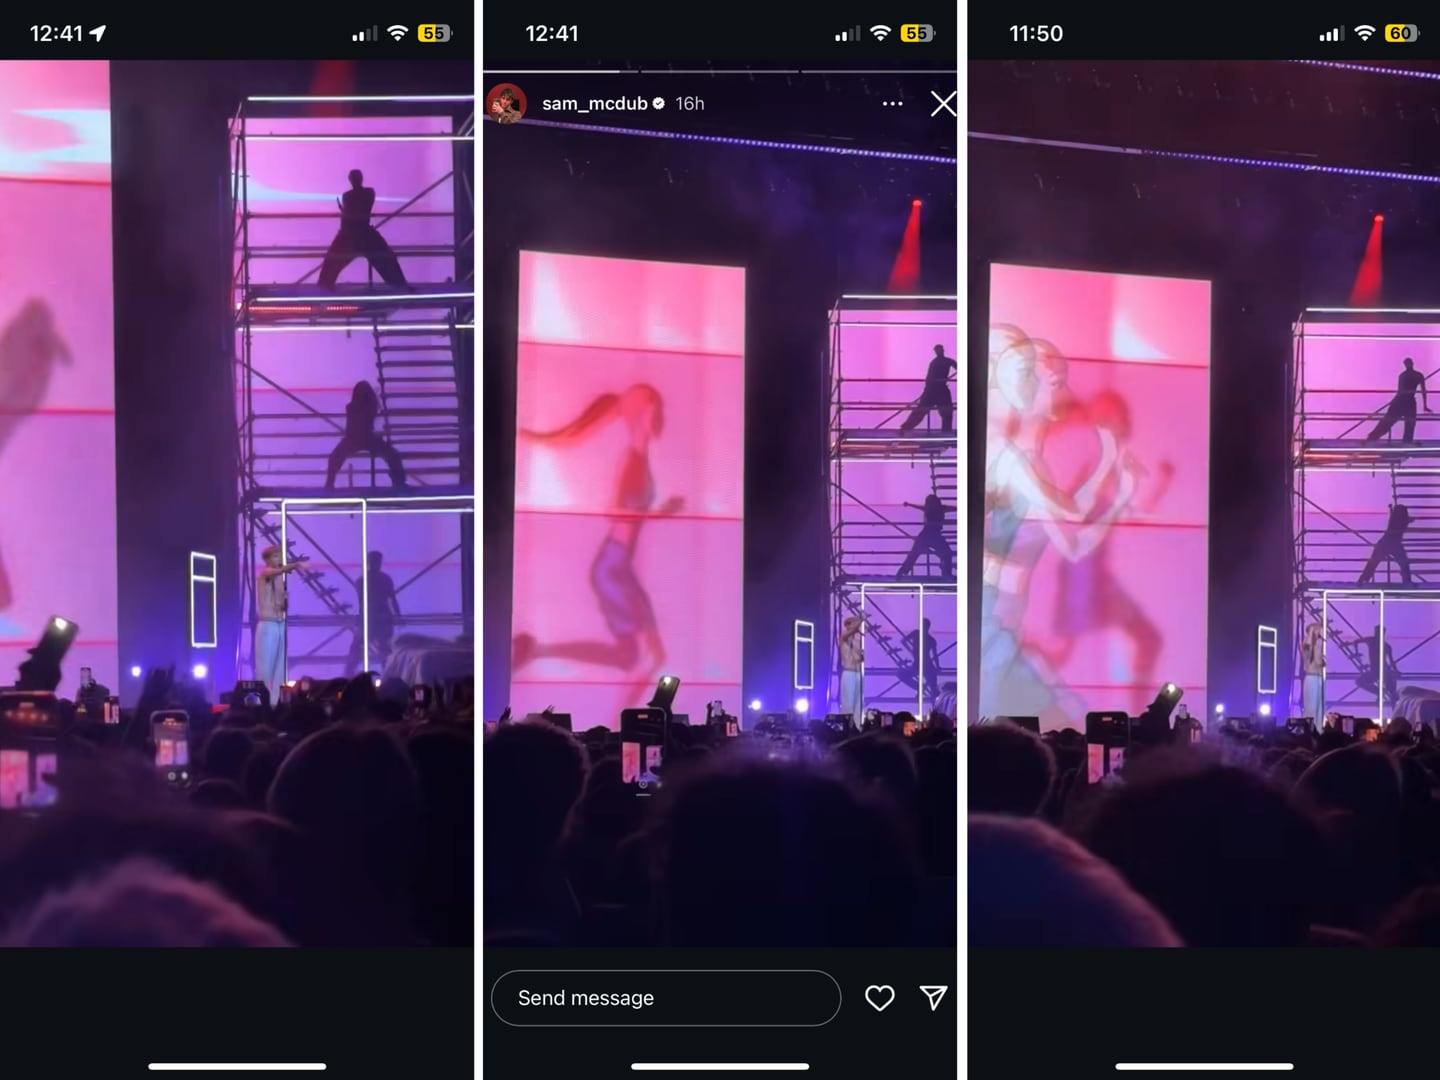 Screenshots from an Instagram story posted by Taylor Swift Eras tour dancer  Sam McWilliams. Photograph: Instagram/@sam_mcdub